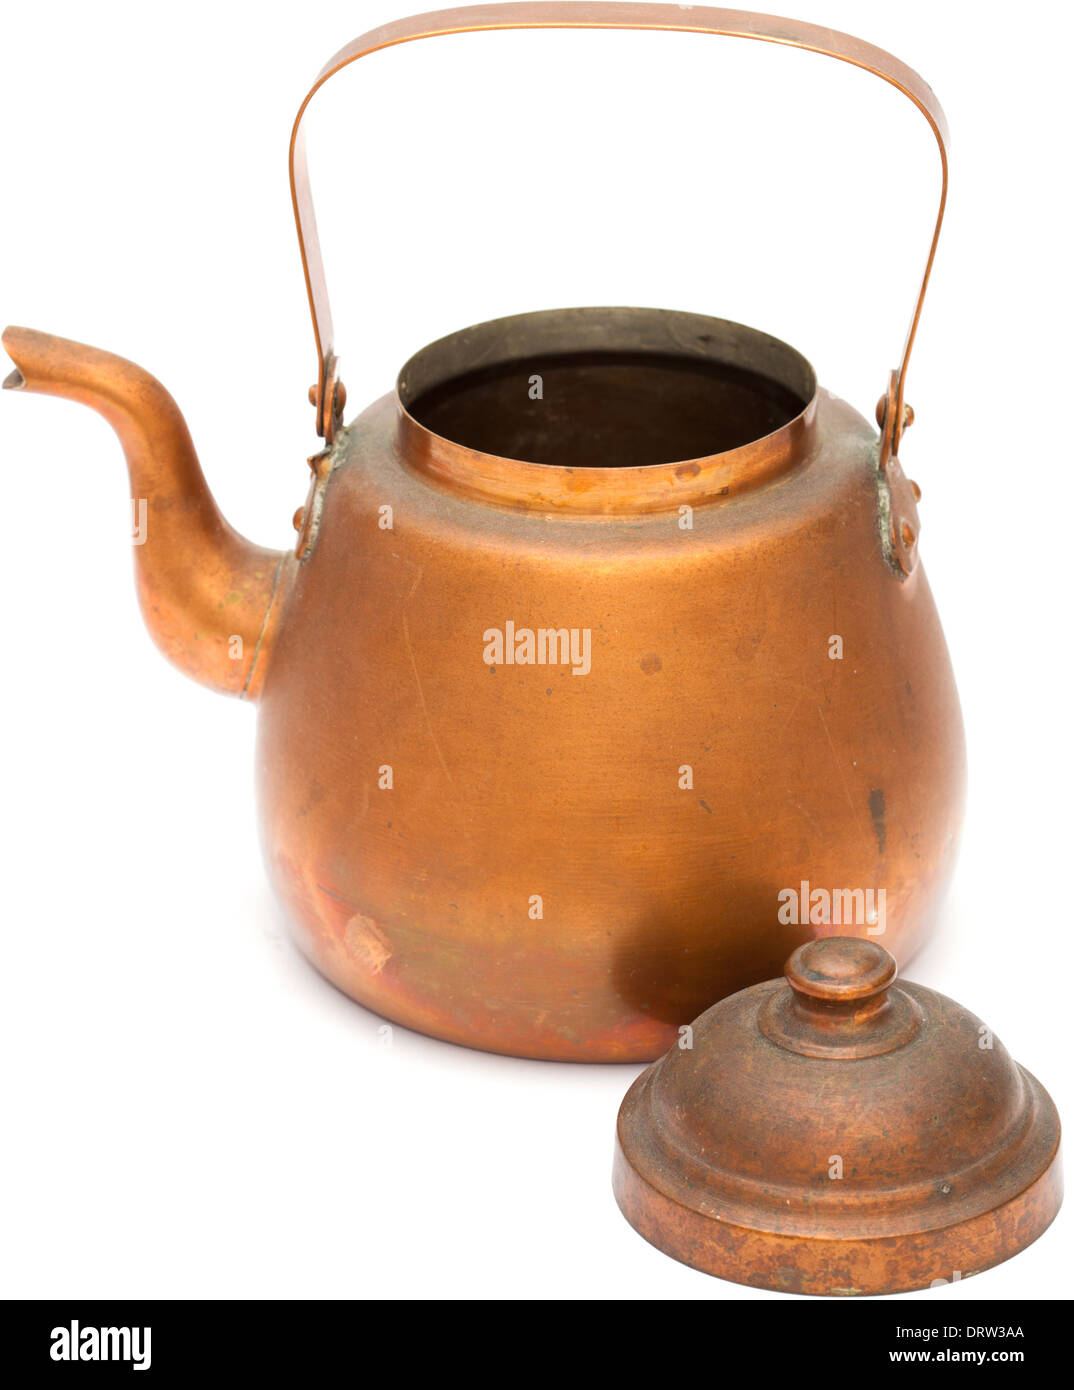 https://c8.alamy.com/comp/DRW3AA/vintage-copper-kettle-isolated-on-white-background-DRW3AA.jpg